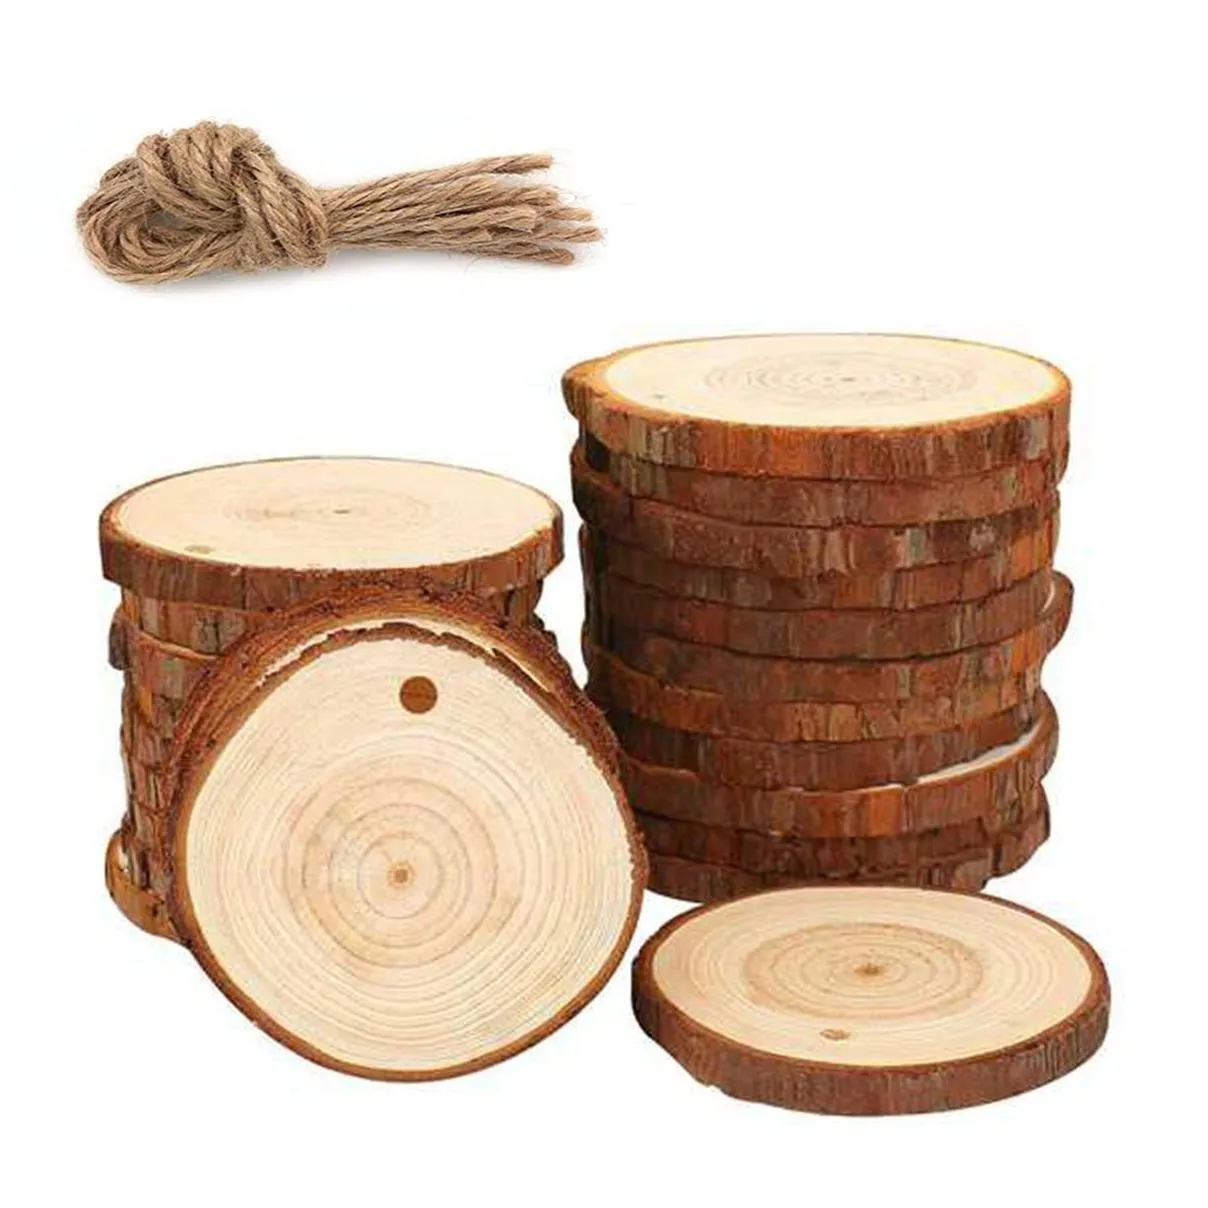 Pine Wood Slices 3 1/2 Round Wooden DIY Crafts For Christmas Ornaments  Dried 2/5 Thick Blank Unfinished Coasters DH9487 Drop D Dhomv Craft Tools  For Wood From Lybdehome, $0.17